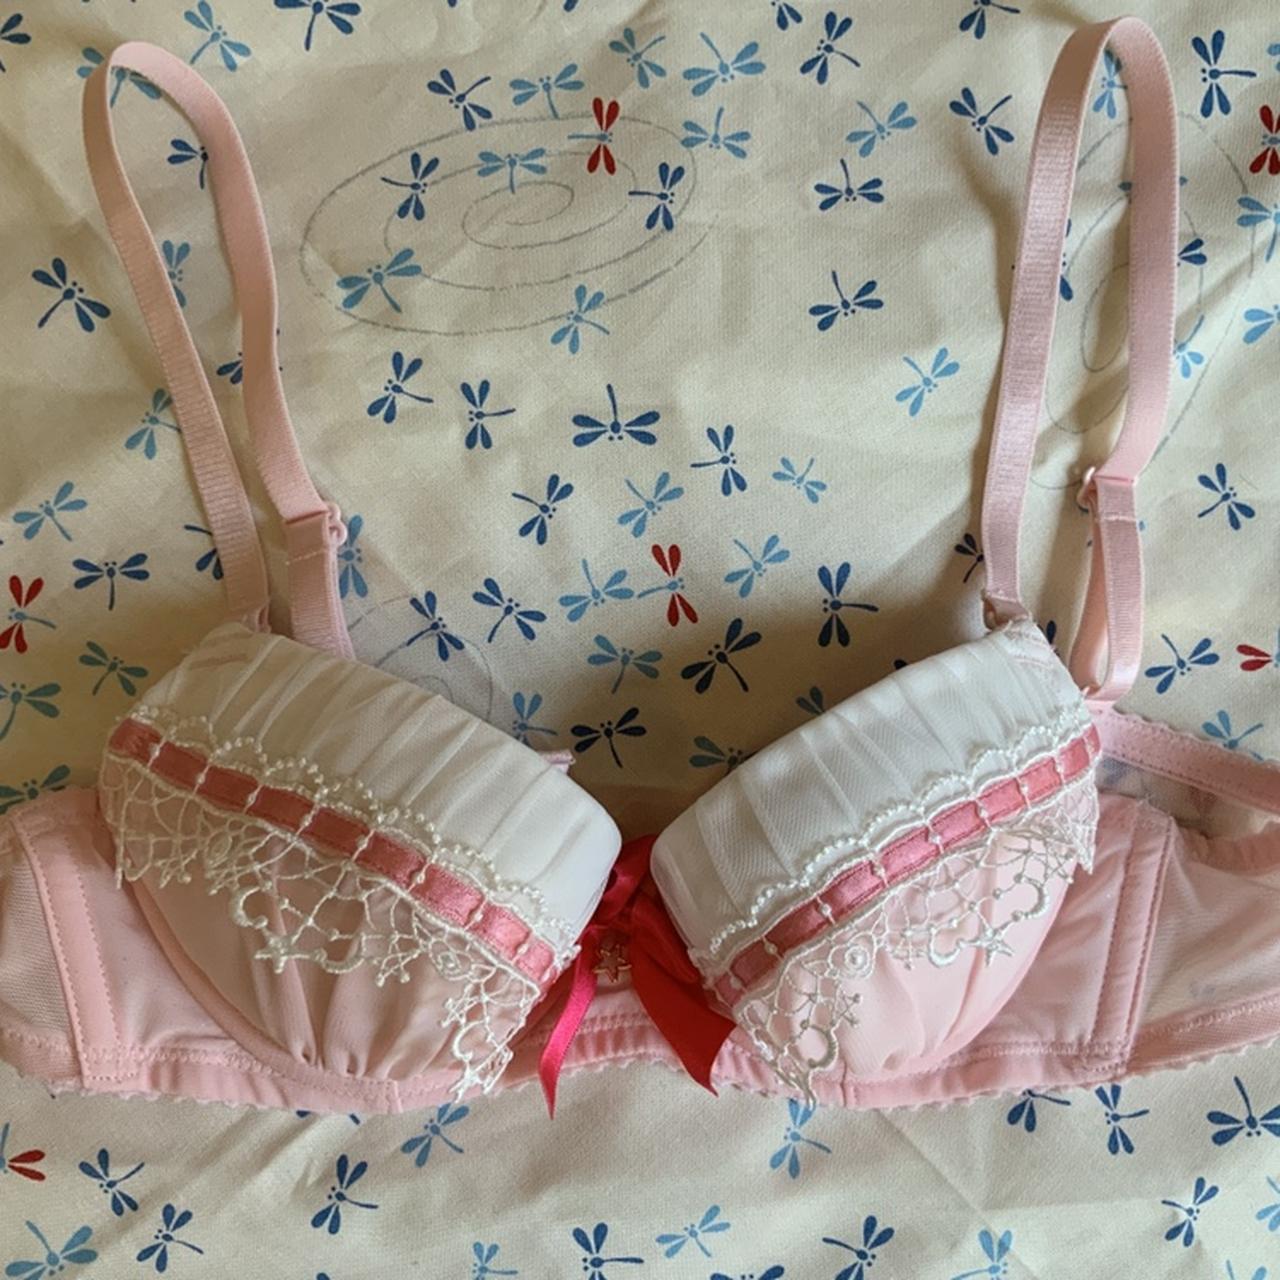 ❣️❣️BRA SIZE IN JAPANESE❣️❣️ A70 = 32A !! Band size is